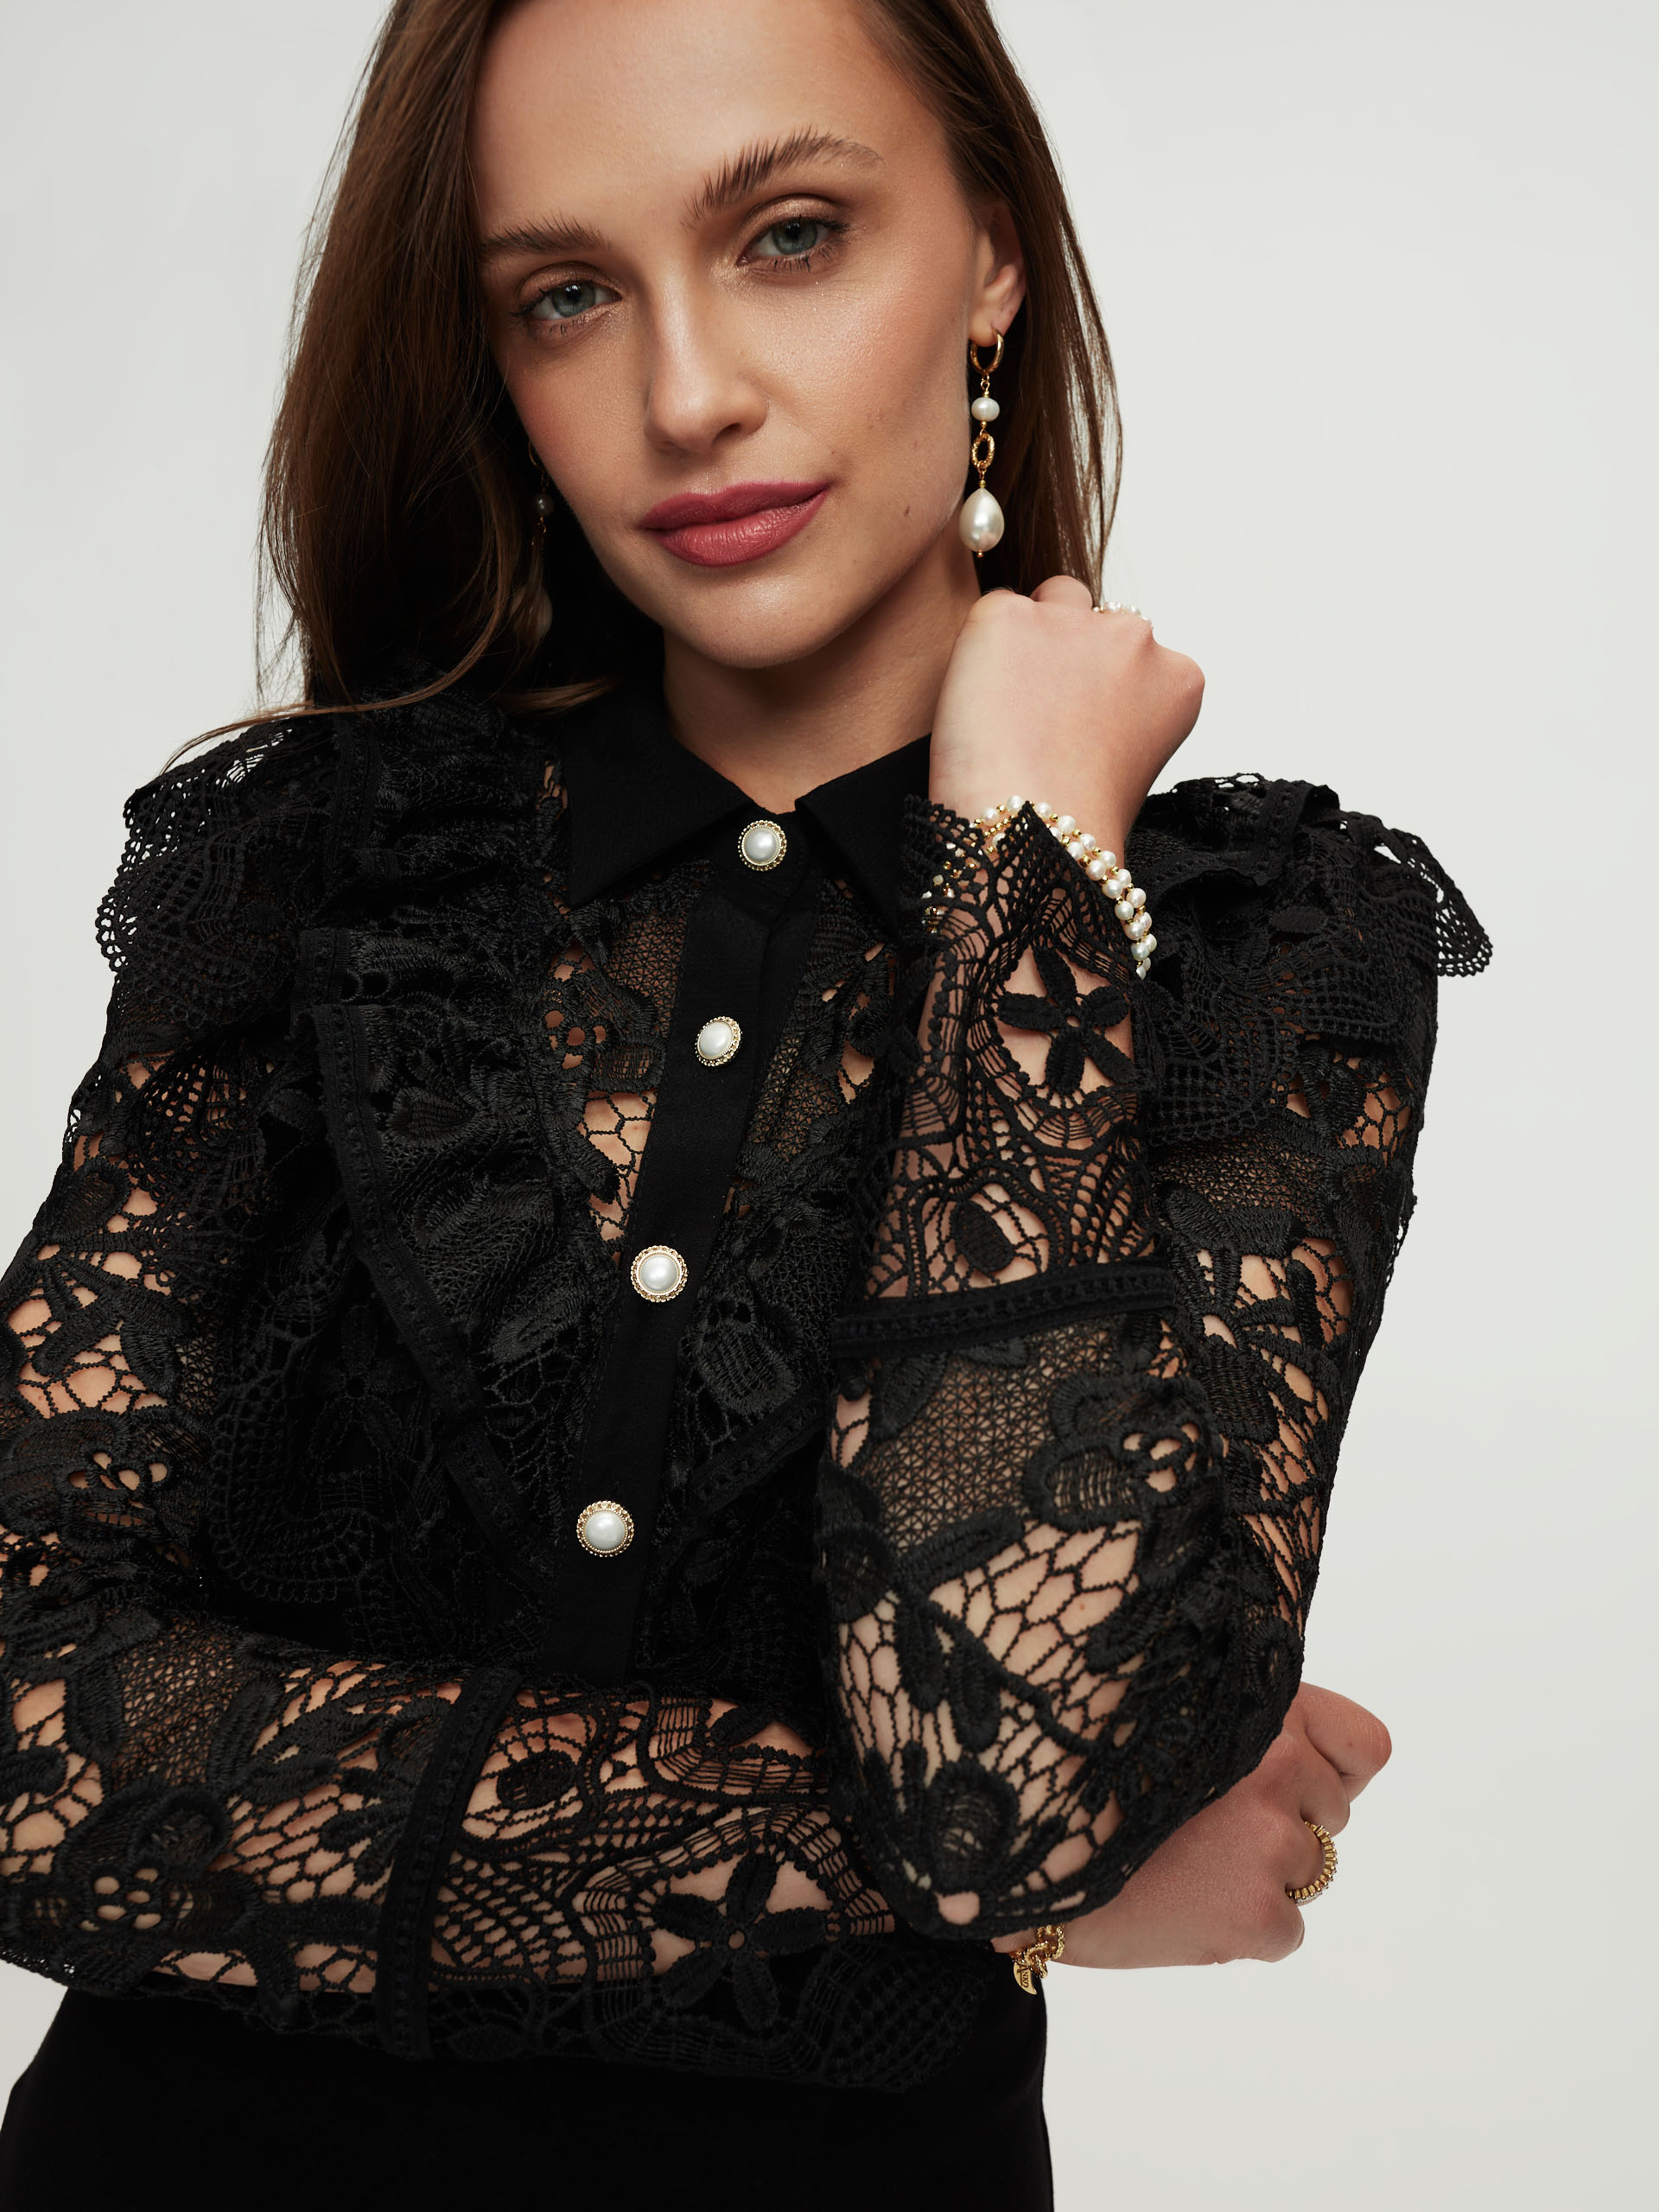 Black dress with lace sleeves